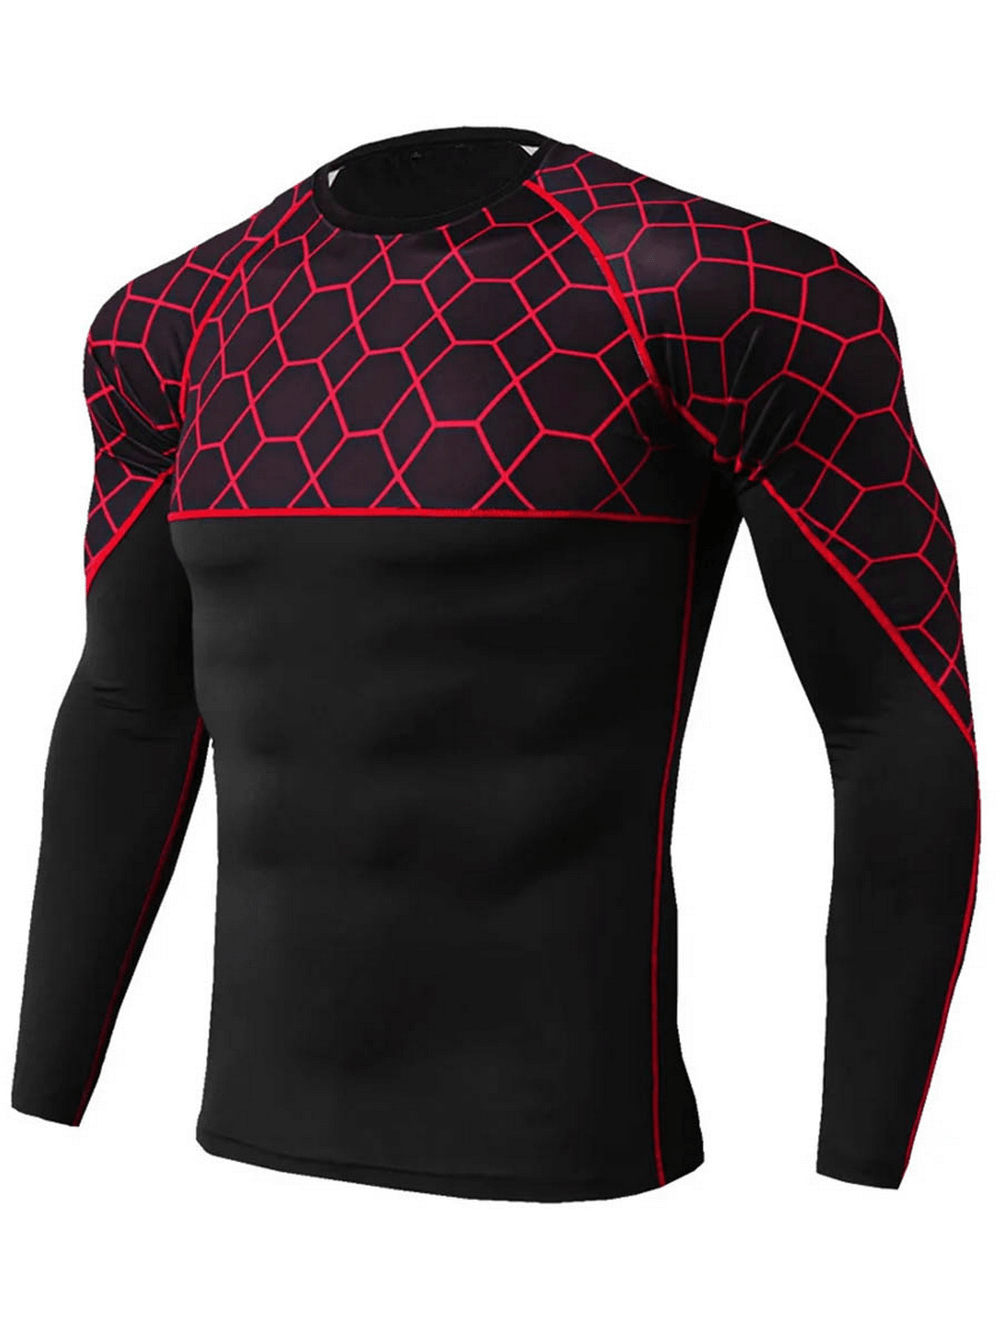 Men's Athletic Long Sleeve Sports Top - SF2223